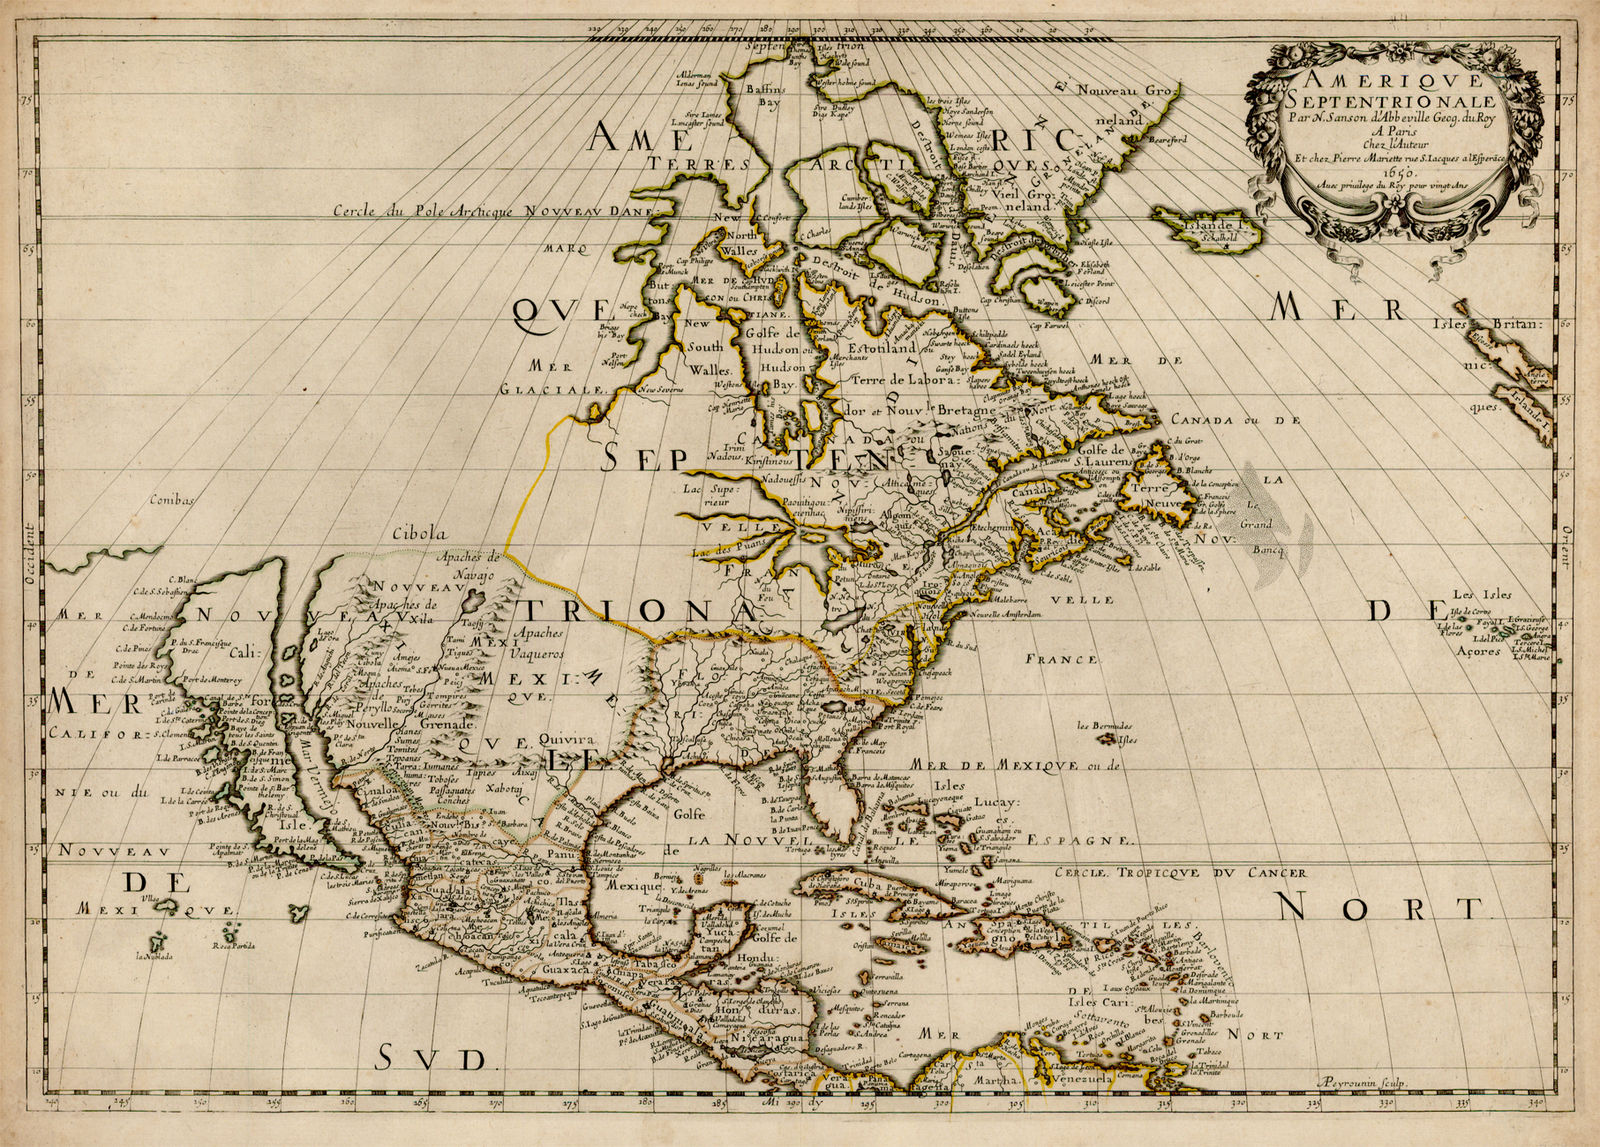 Much of New France's "Pays d'en Haut" (Upper Country) remained unexplored in the mid-1600s; Nicolas Sanson d'Abbbeville's 1650 map was the first to show all five Great Lakes[46][46]